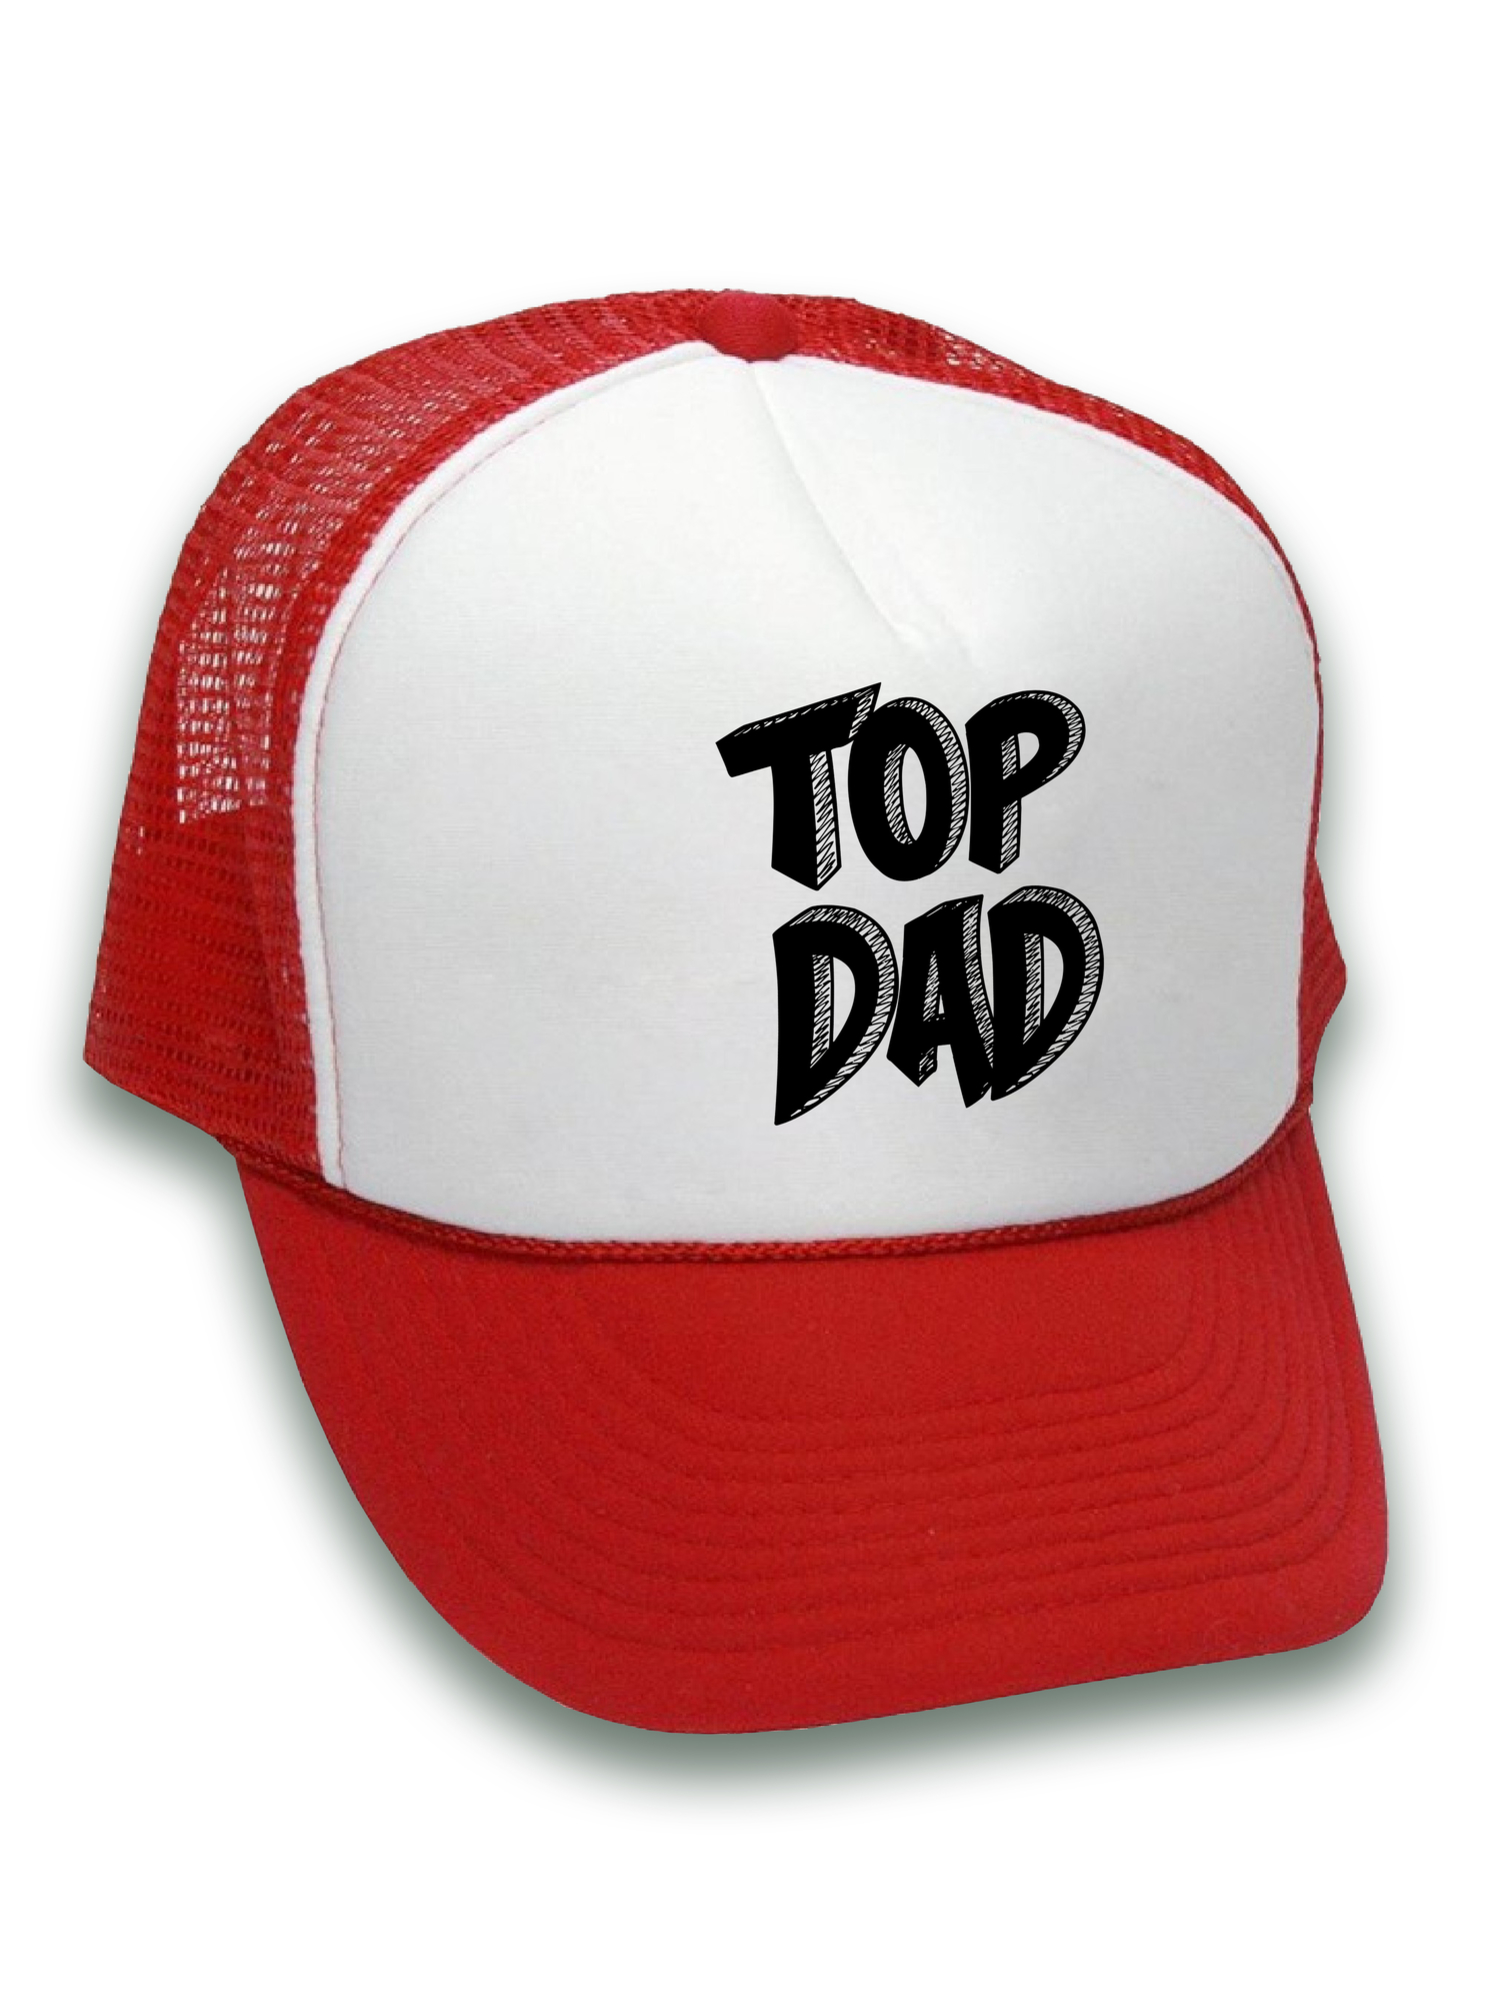 Awkward Syles Gifts for Dad Top Dad Trucker Hat Top Dad Gifts for Father's Day Best Dad Ever Trucker Hat Dad Accessories Father's Day Gifts Dad 2018 Snapback Hat Daddy Cap Best Dad Gifts - image 2 of 6